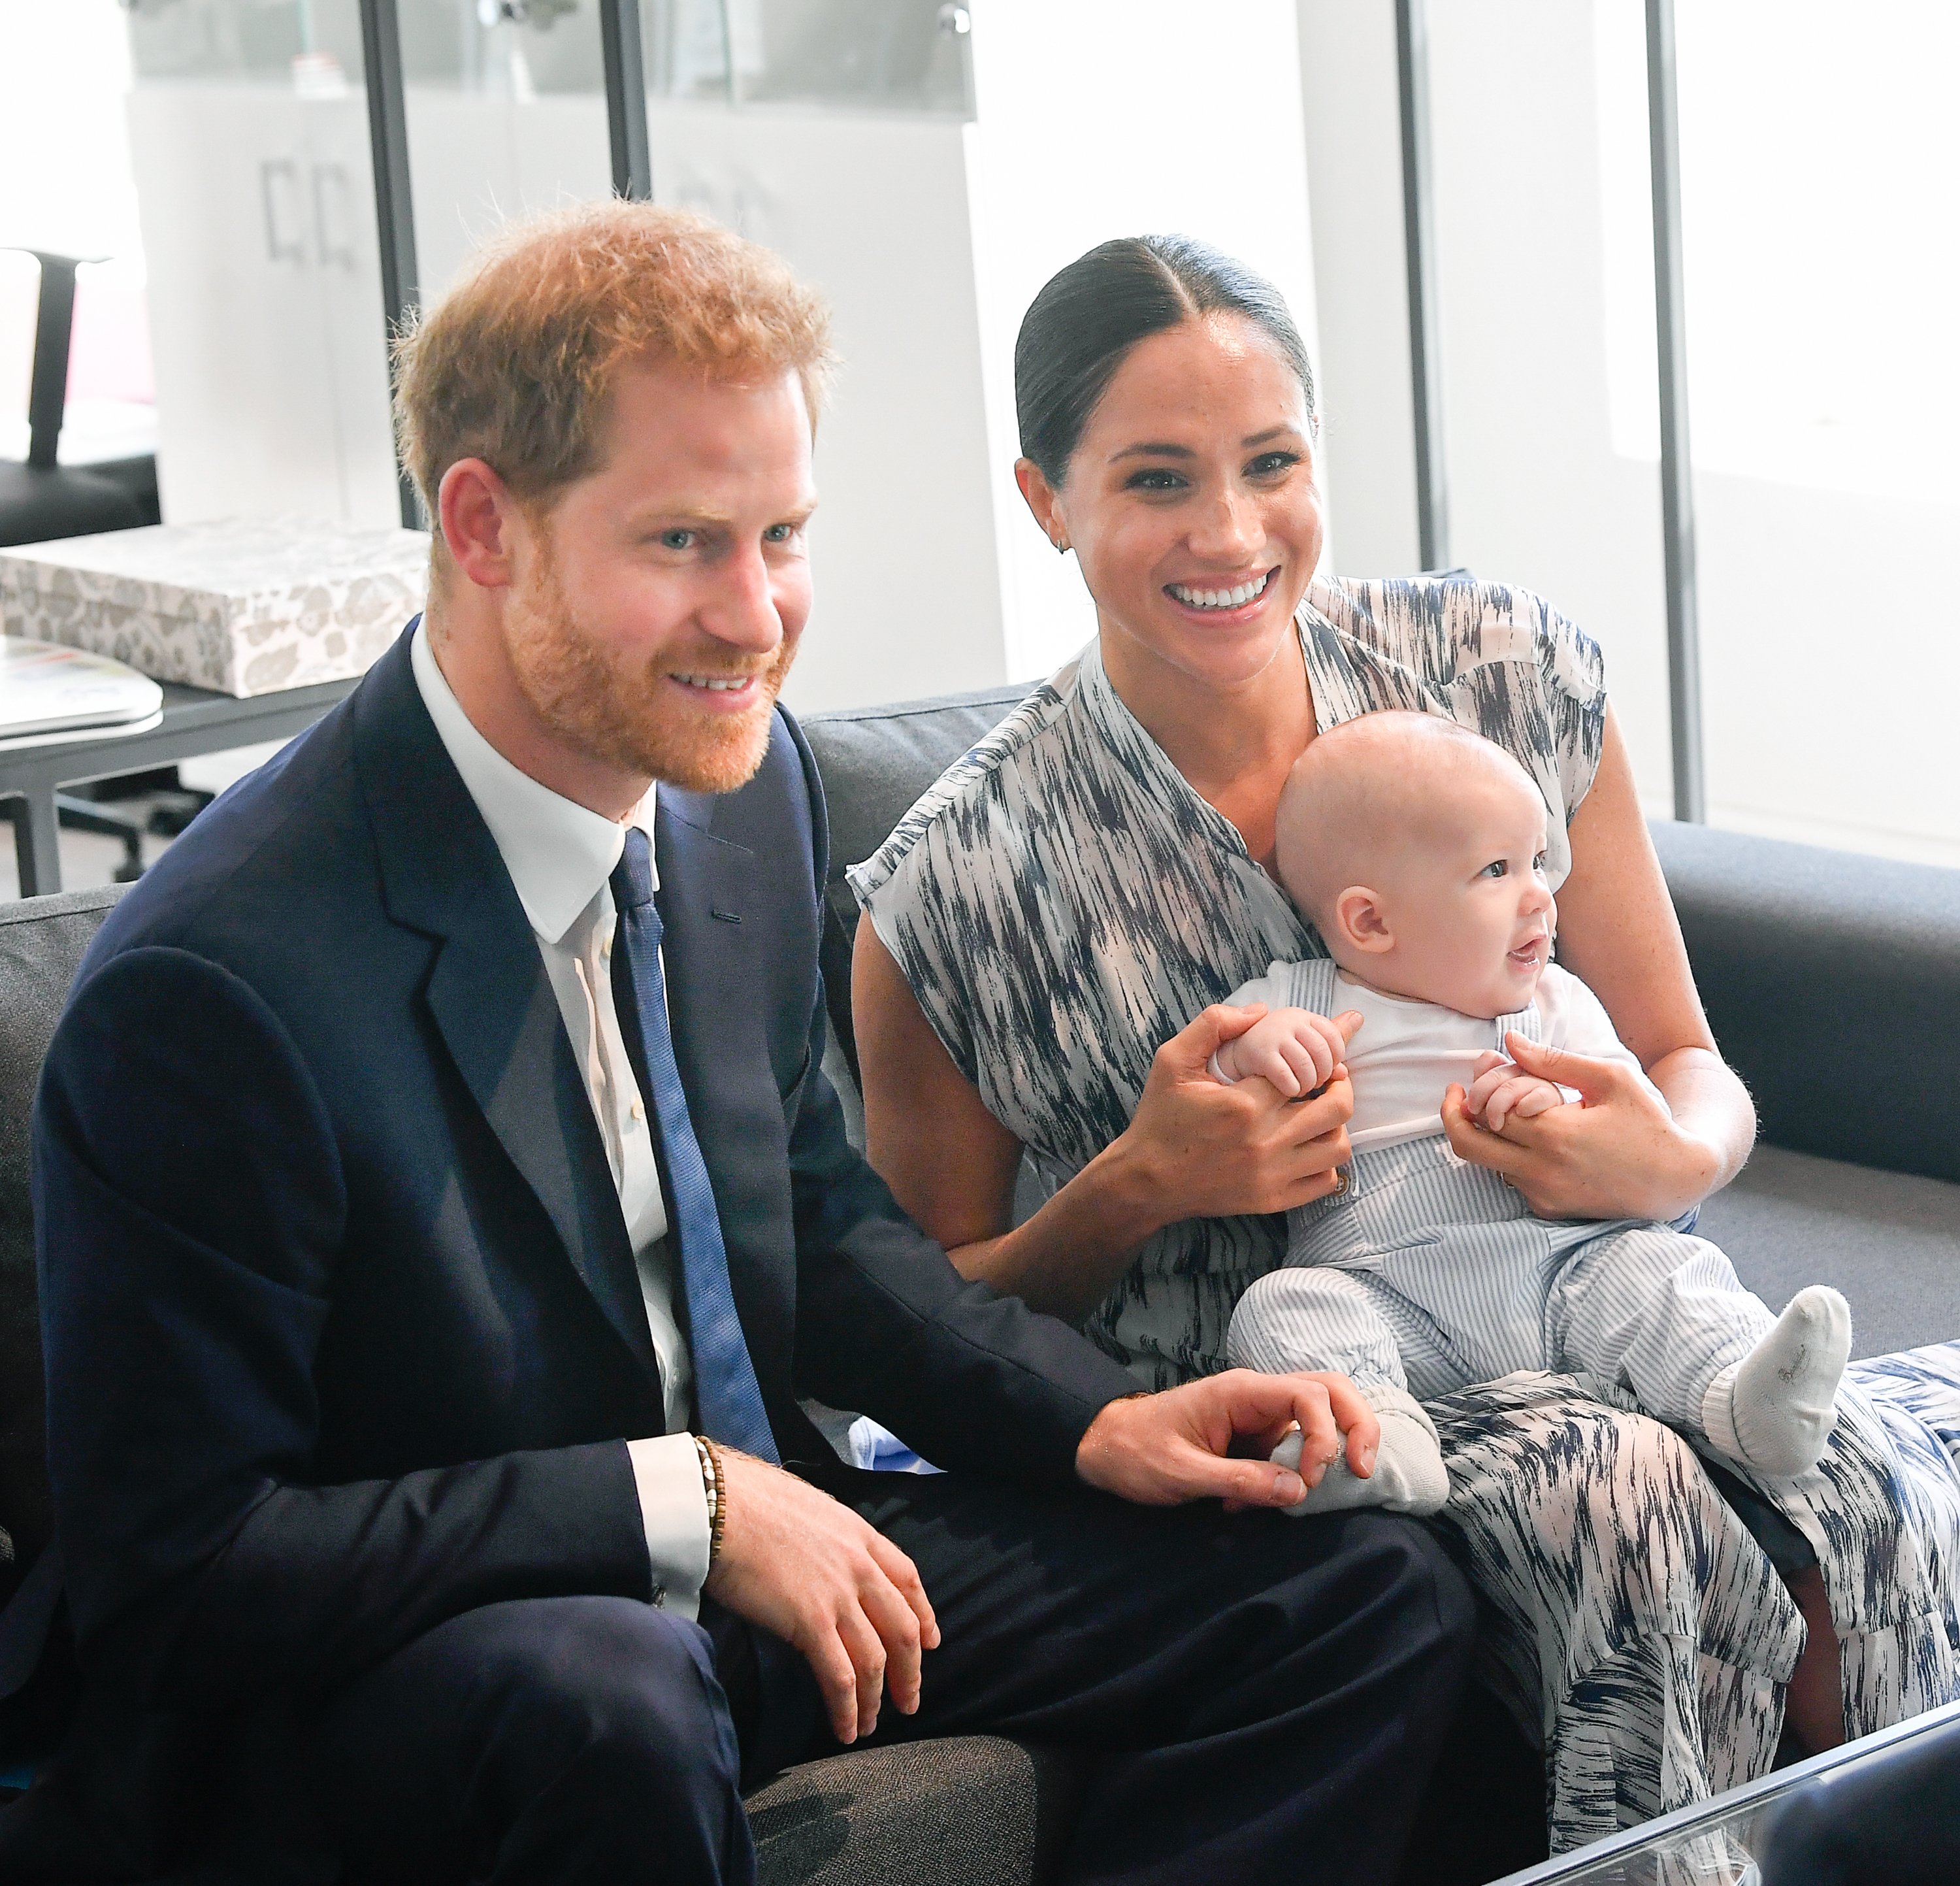 Meghan markle, Prince Archie and Prince William in South Africa, Cape Town in 2019. | Source: Getty Images